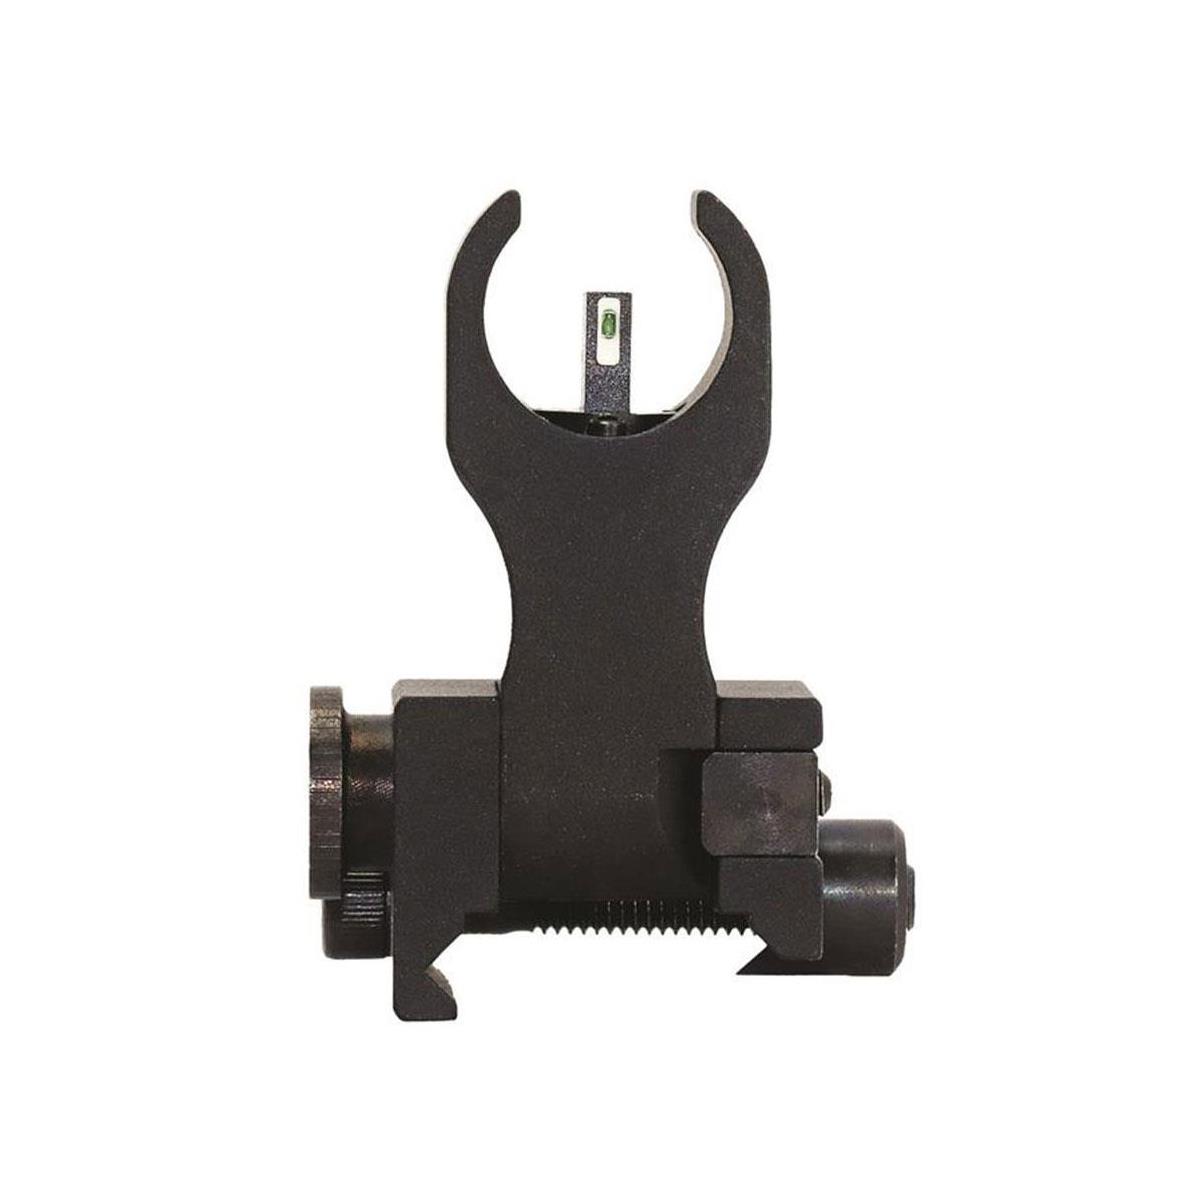 Image of XS Sights Folding Front Sight with XS Tritium Stripe